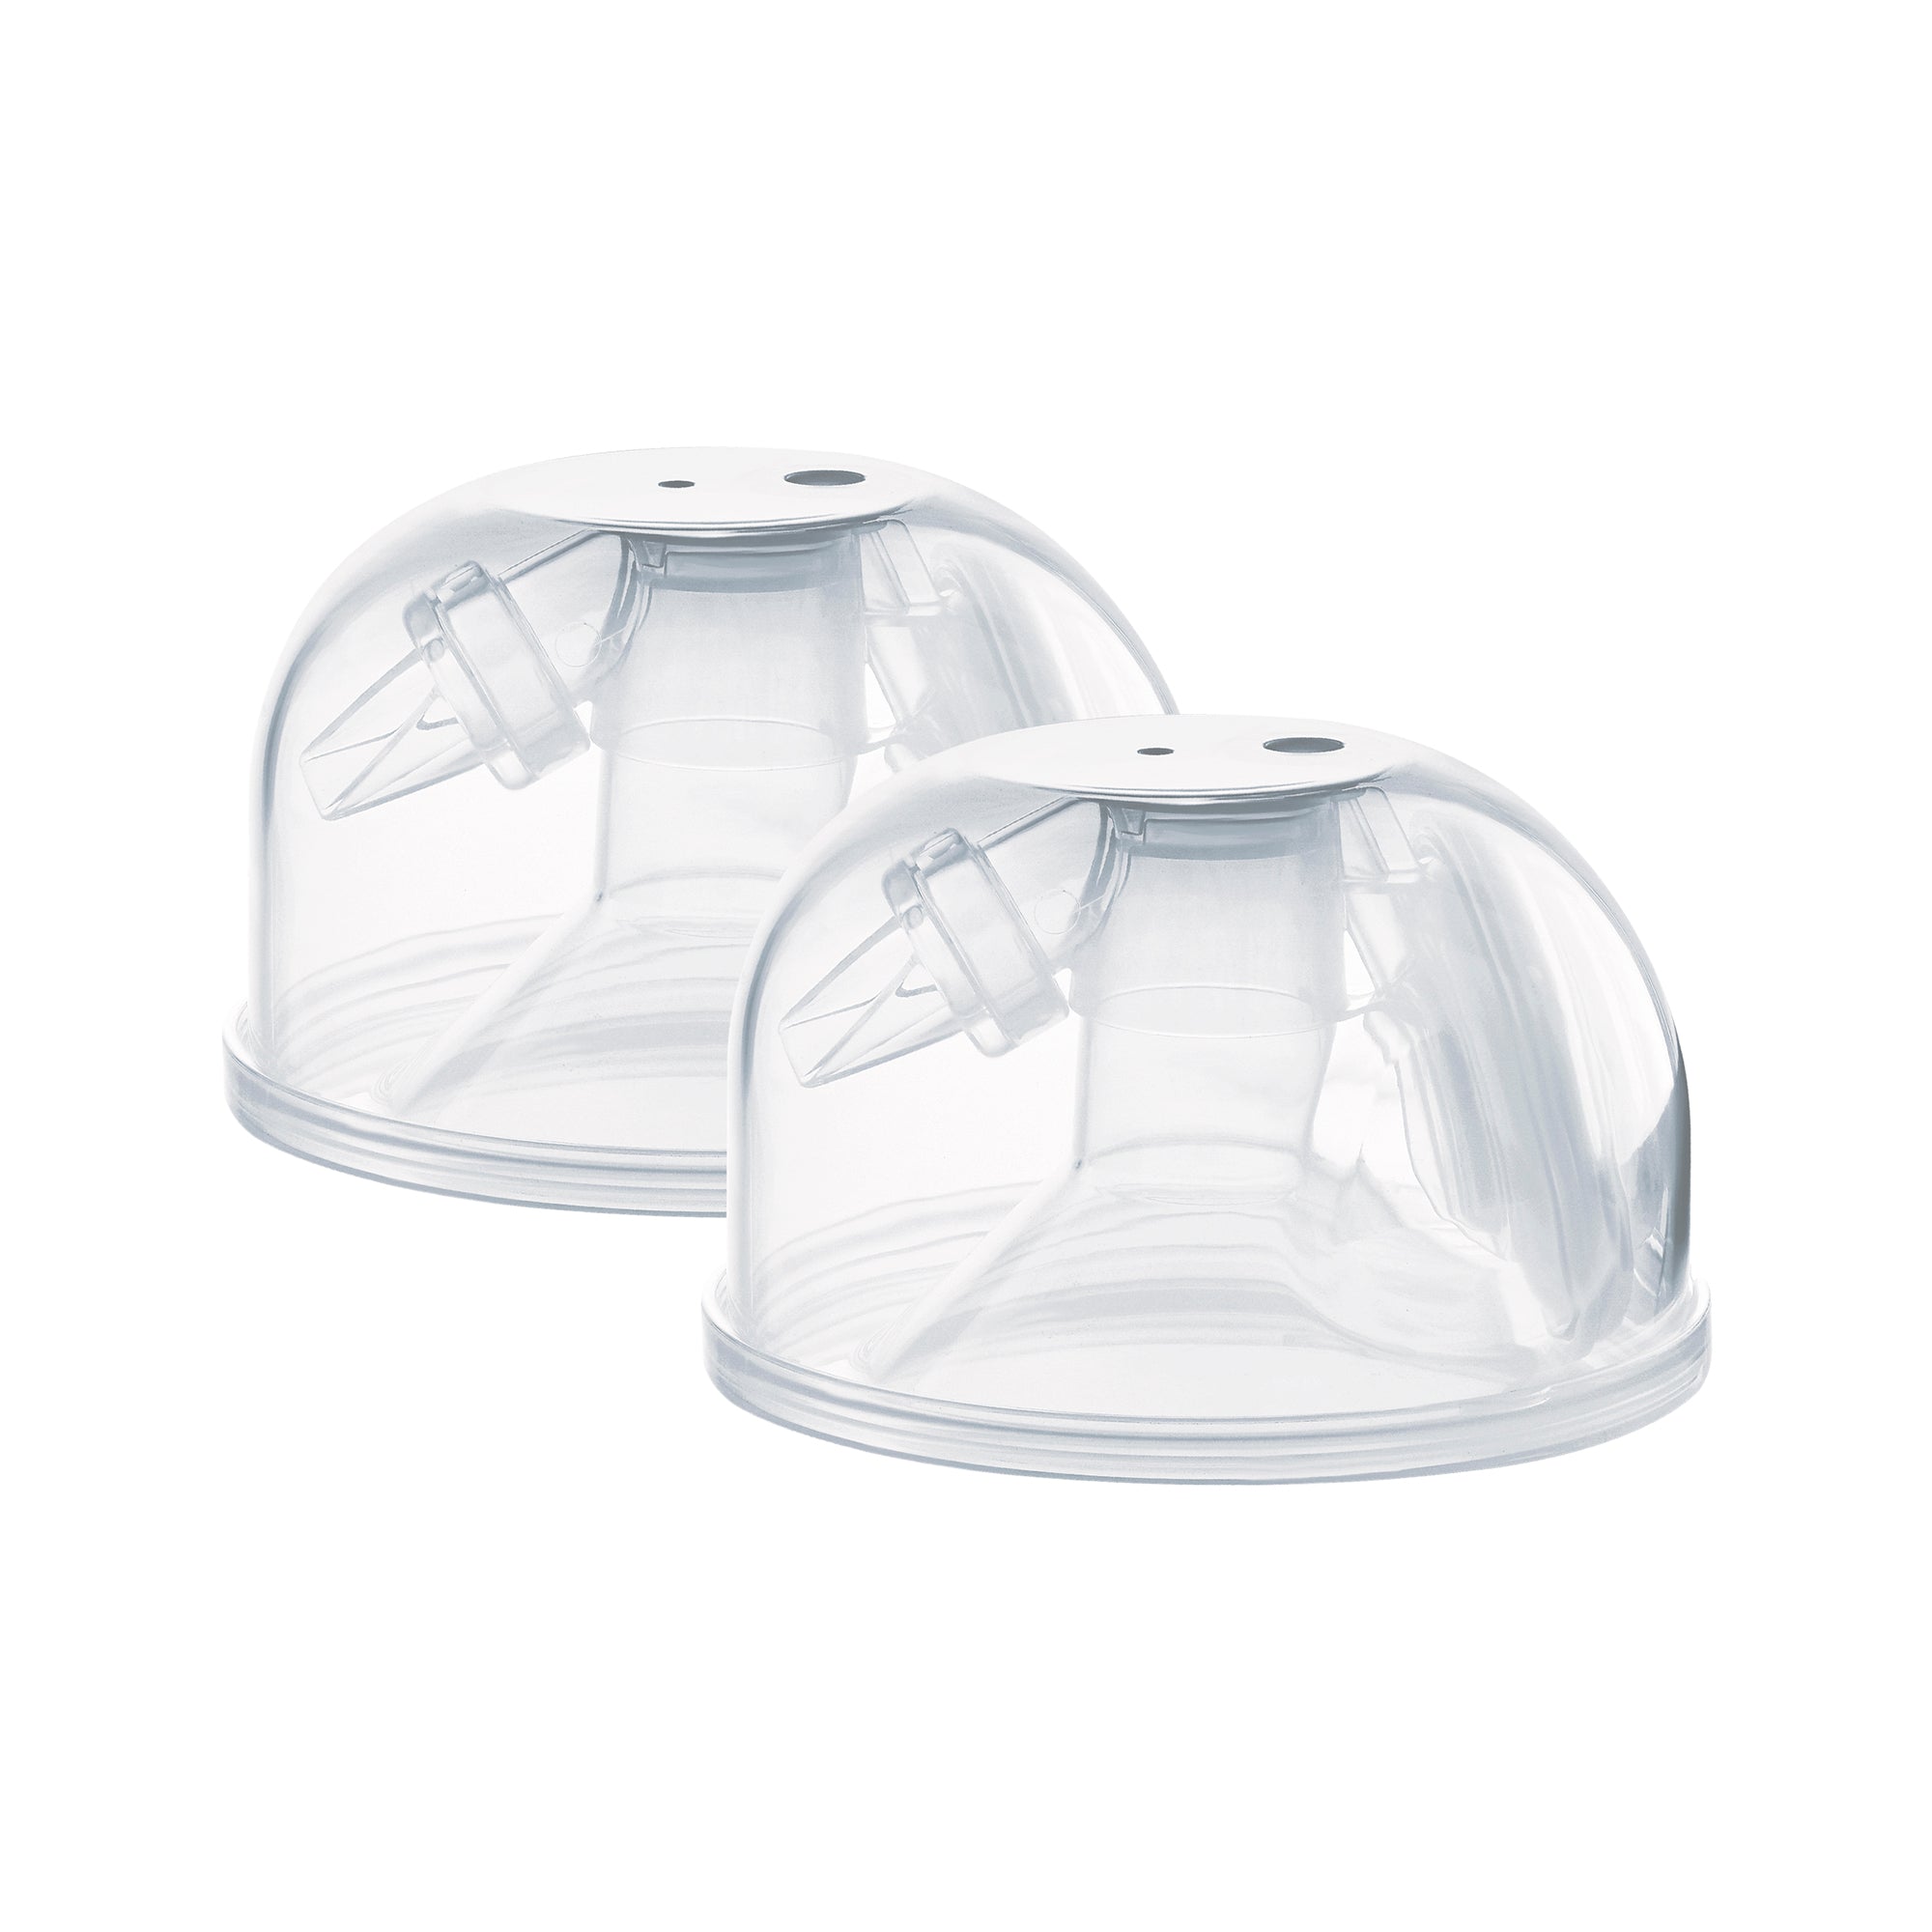 Spectra® CaraCups Wearable Milk Collection Hands-Free Inserts - 24mm